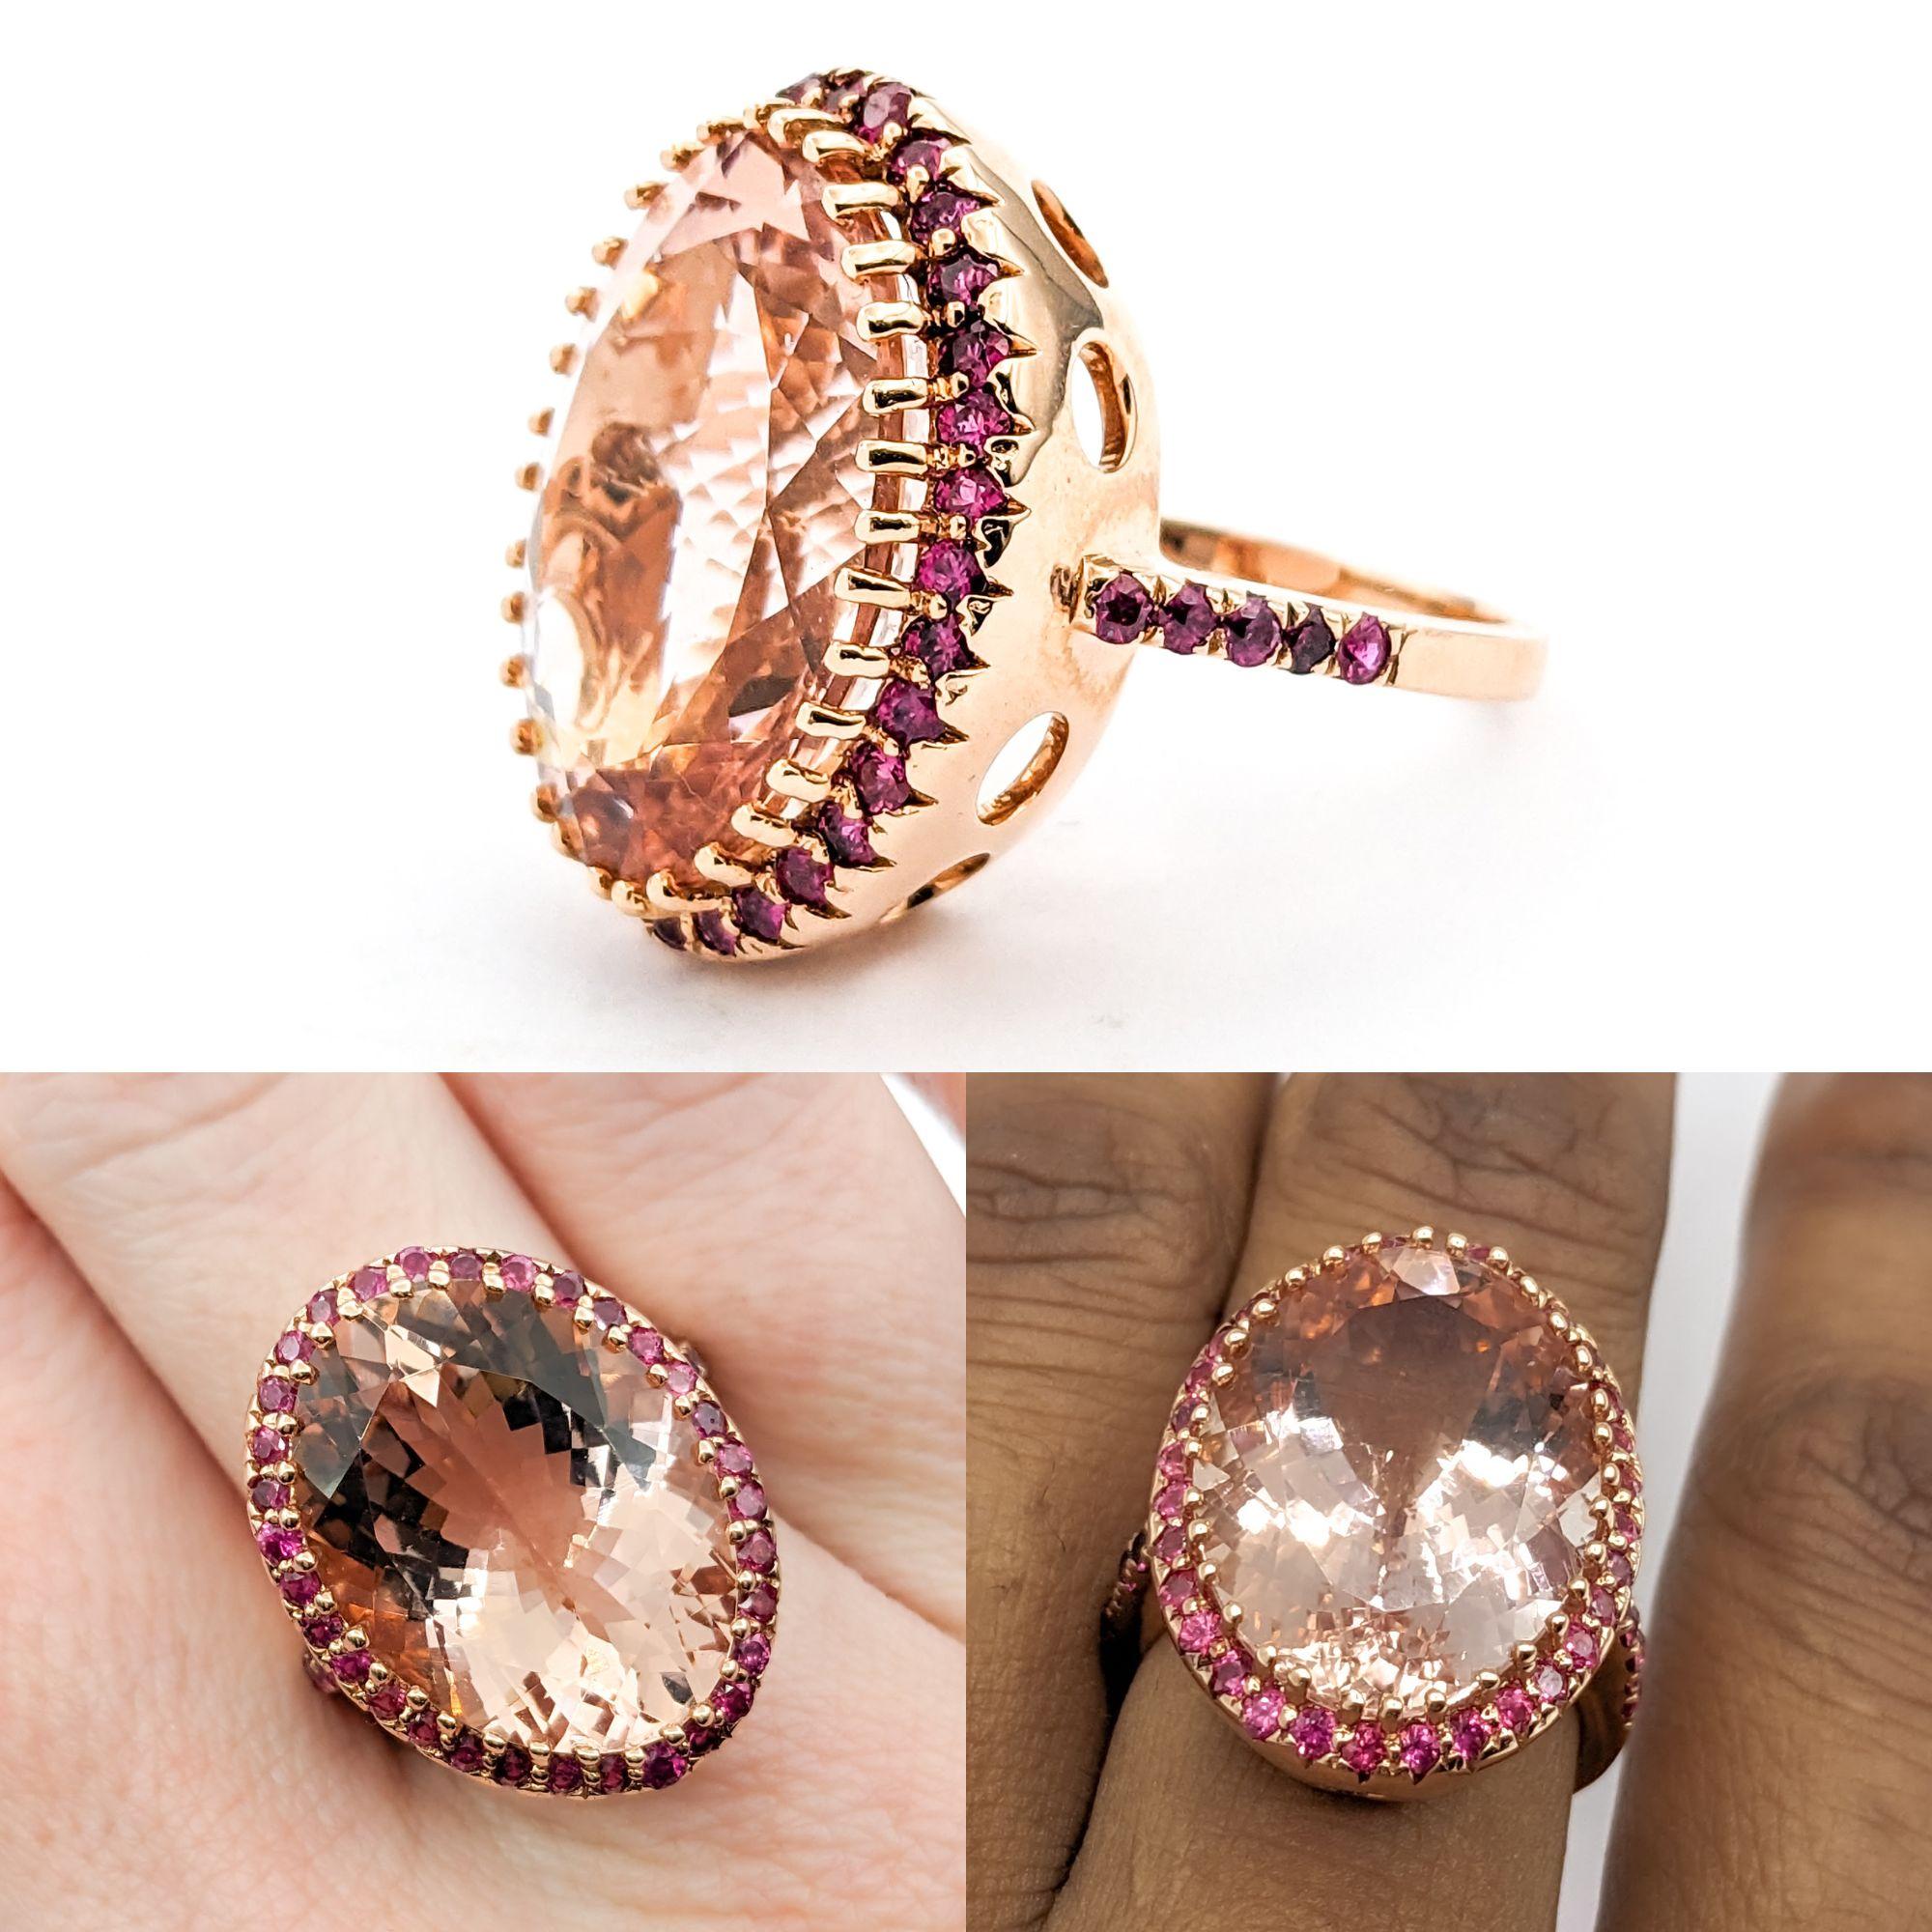 Fabulous Morganite & Ruby Cocktail Ring

This gorgeous statement ring is crafted in 14kt rose gold and features a 19 x 15mm oval-cut morganite surrounded by .50ctw round-cut rubies. This ring is size 7 but can be adjusted upon request (for a fee);